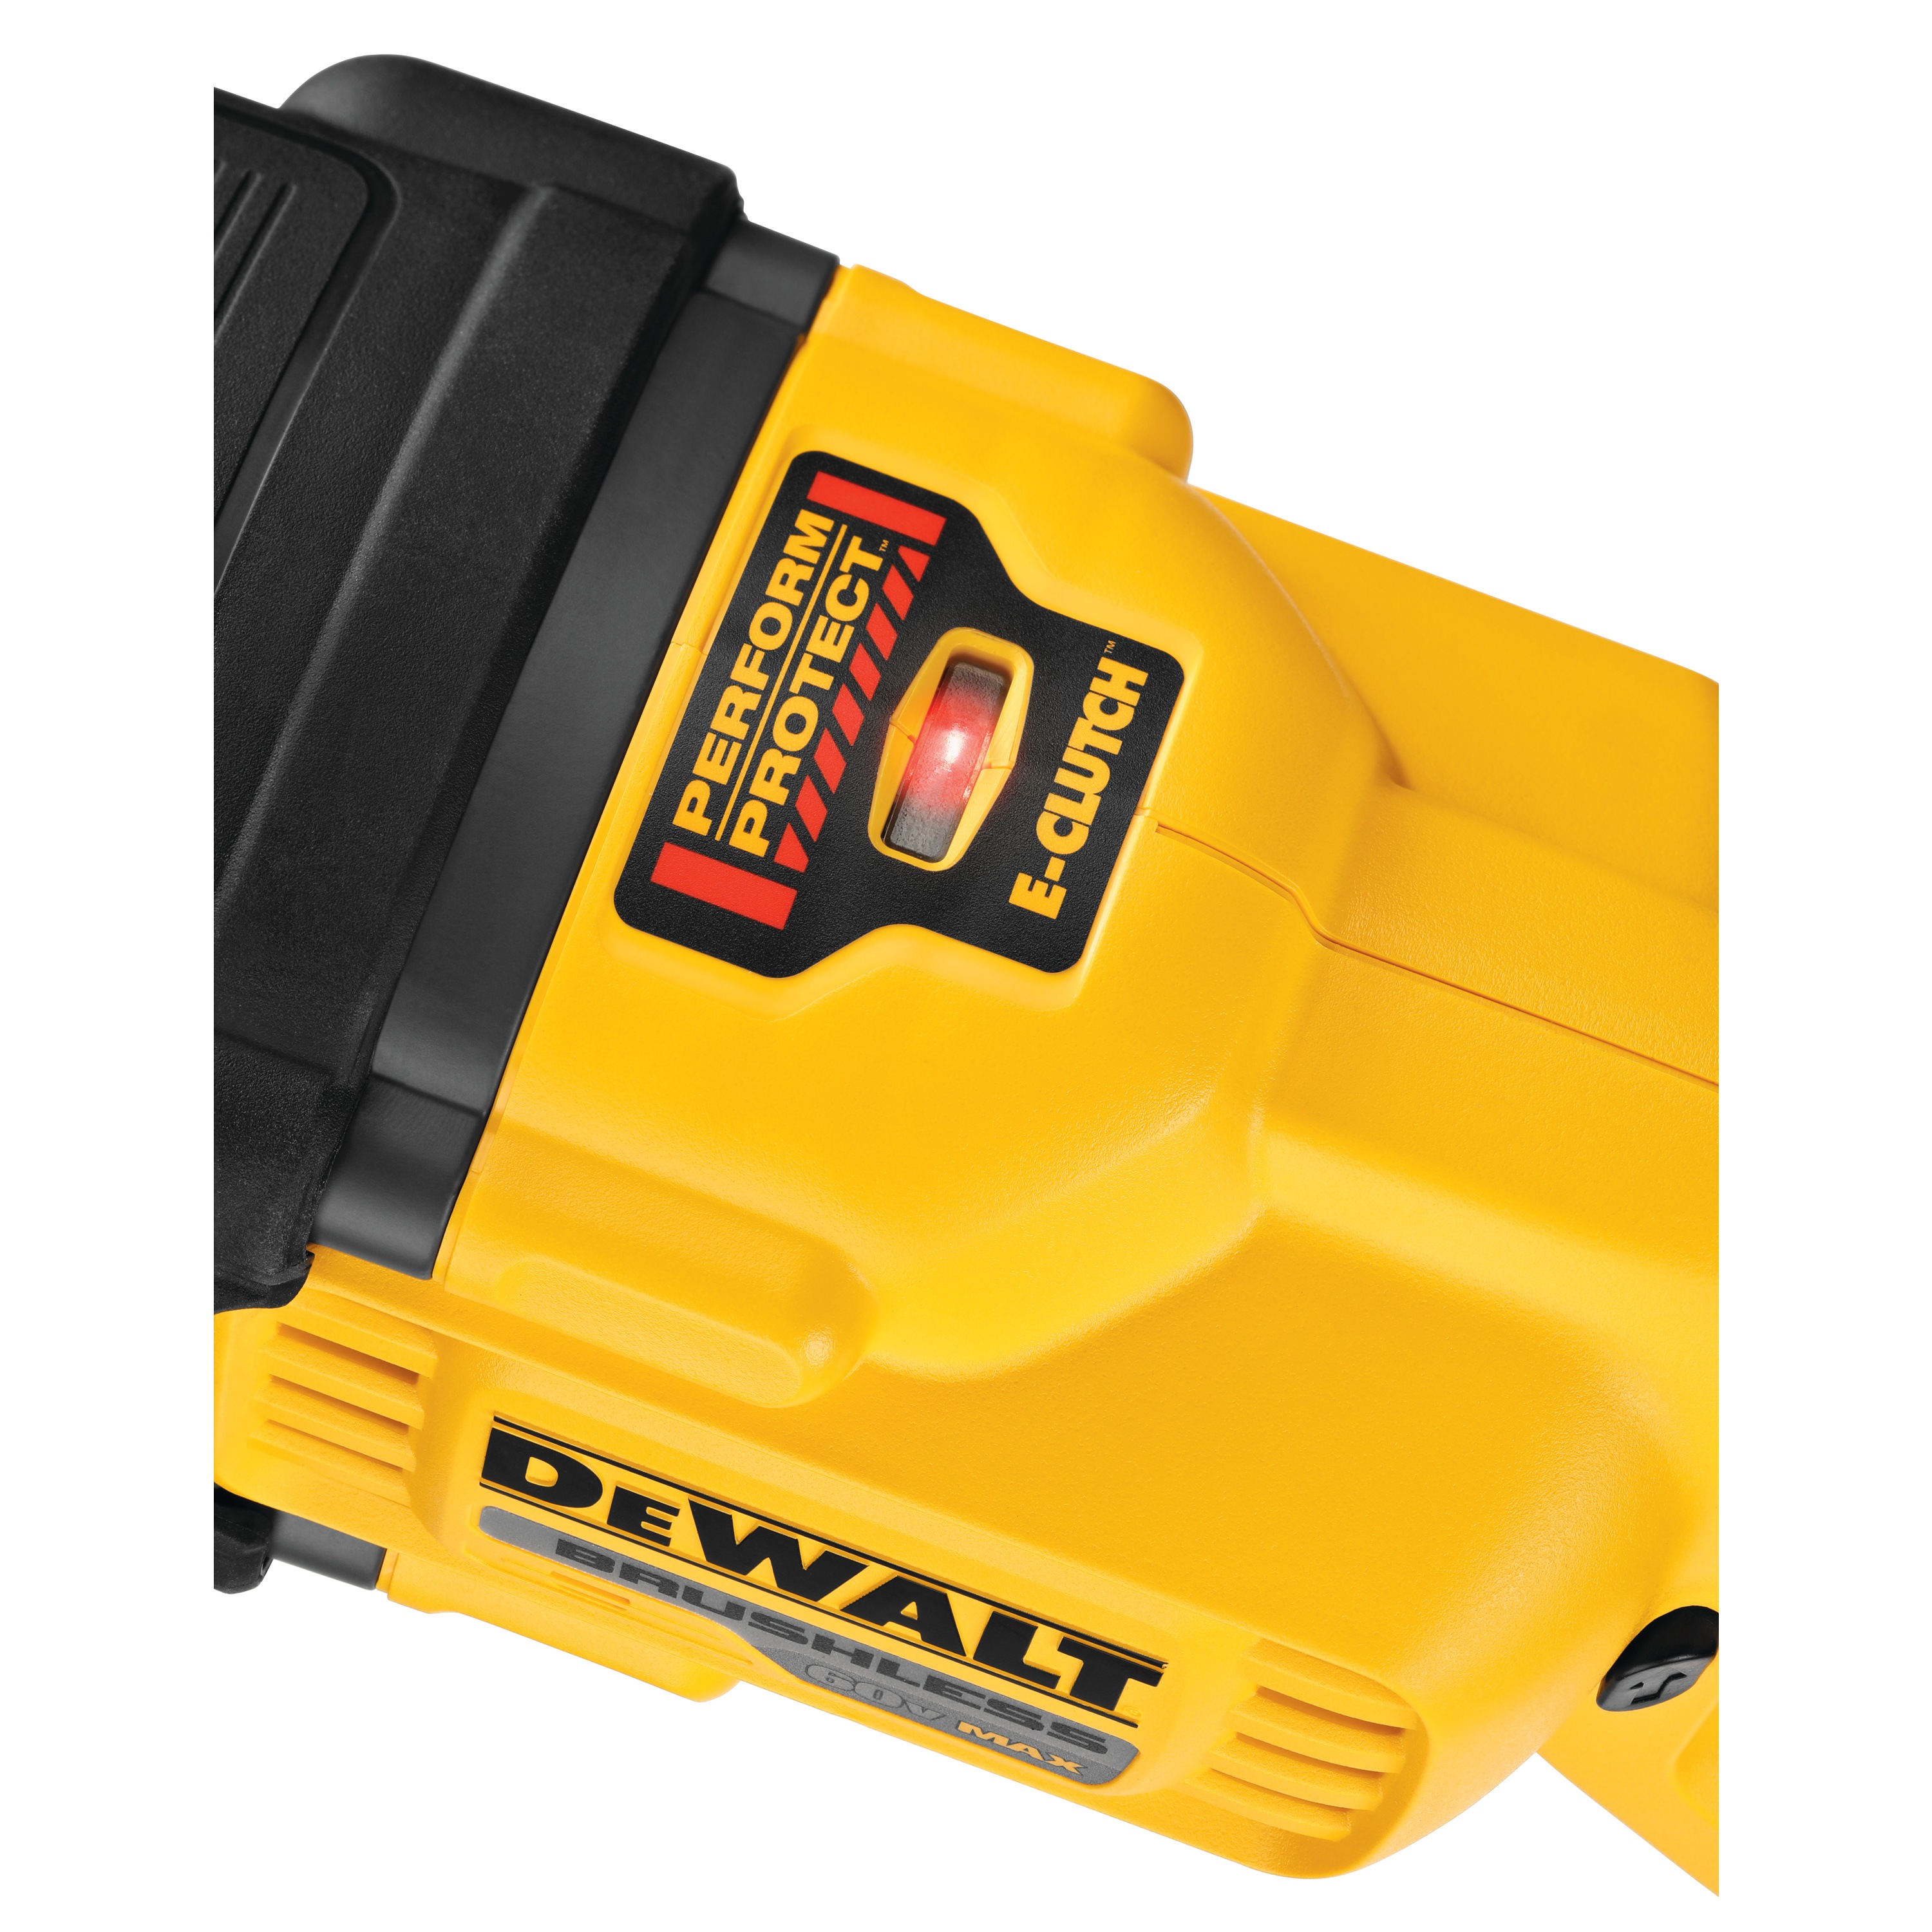 Sensor to detect  motion of  tool with a red indicator LED feature of a cordless quick-change stud and joist drill.